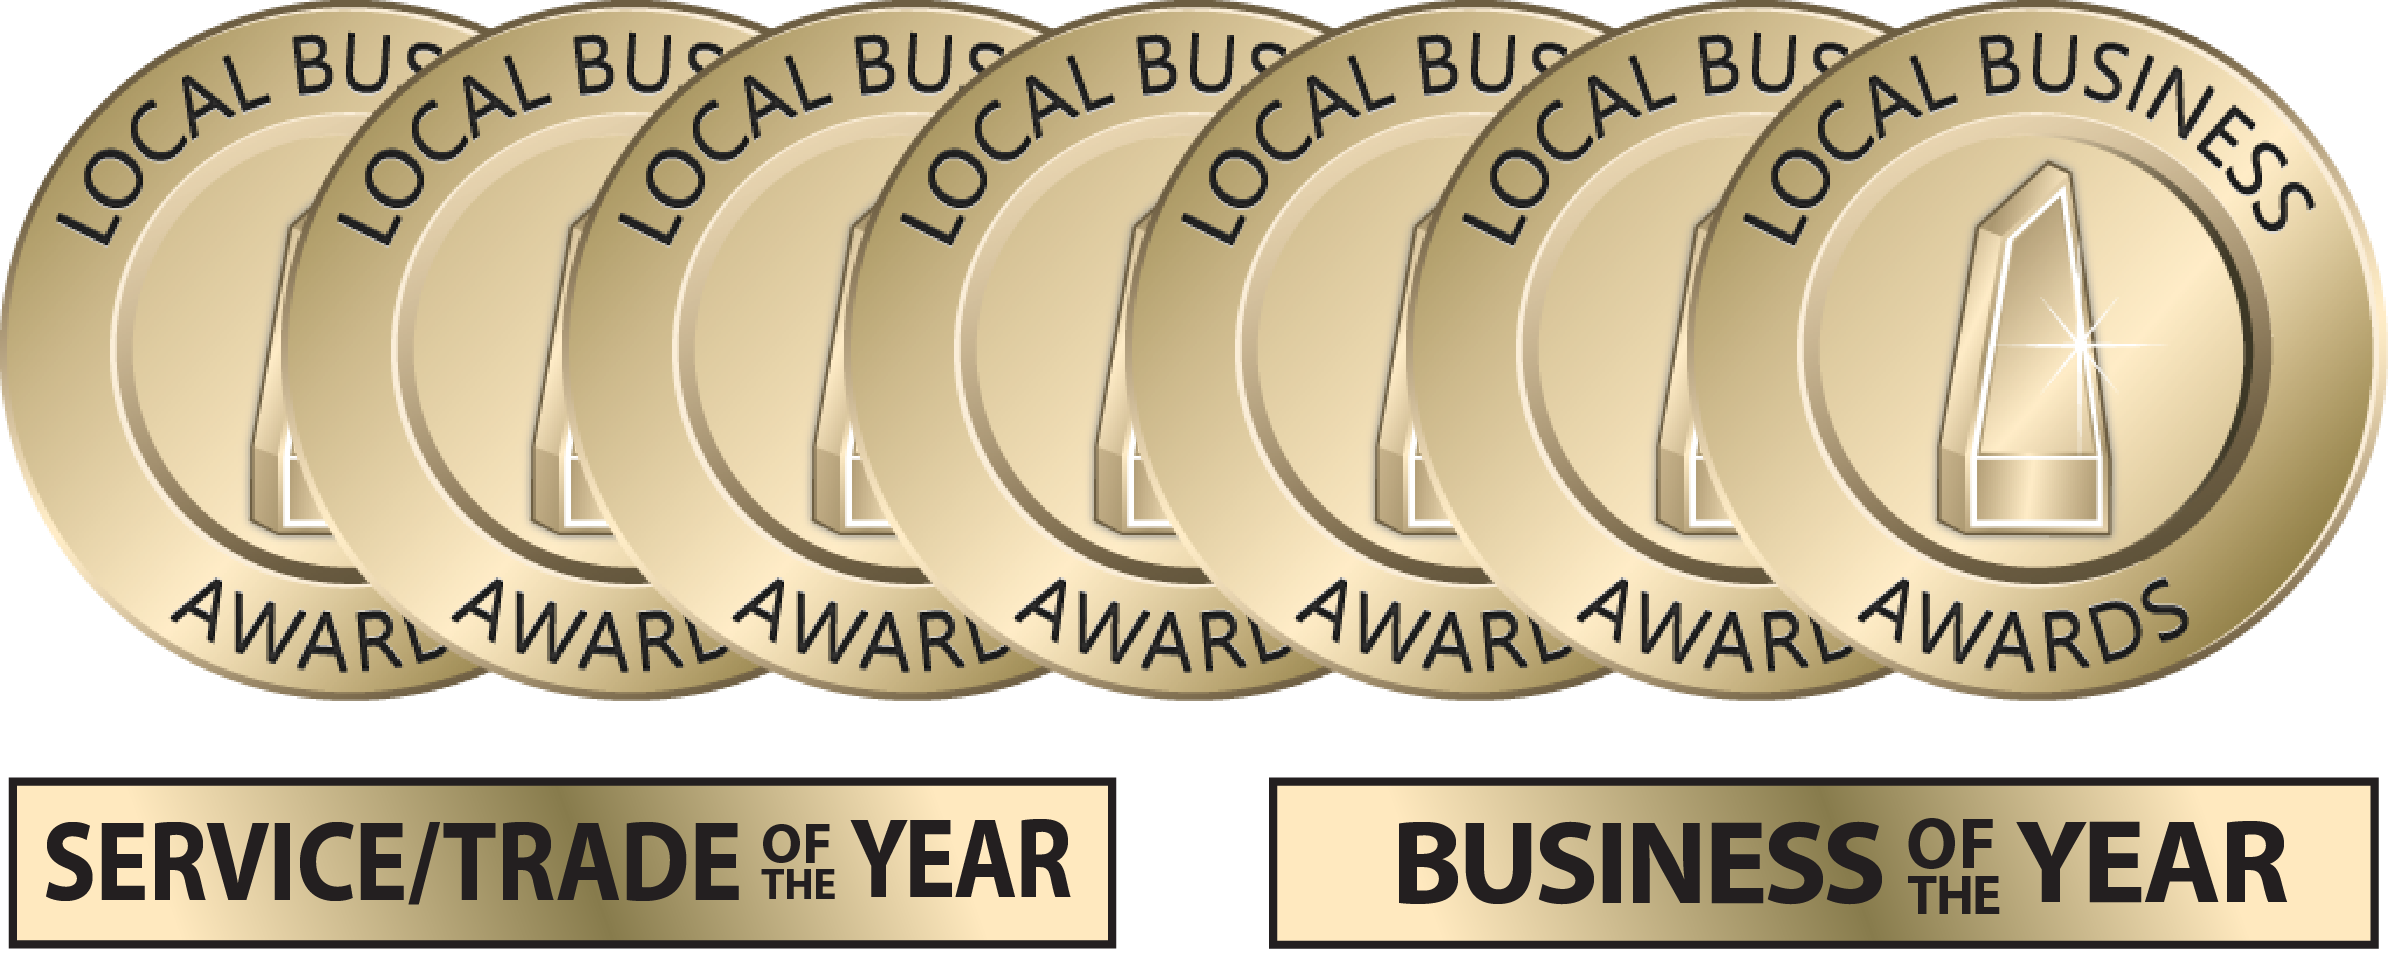 local business of the year 7 years in a row